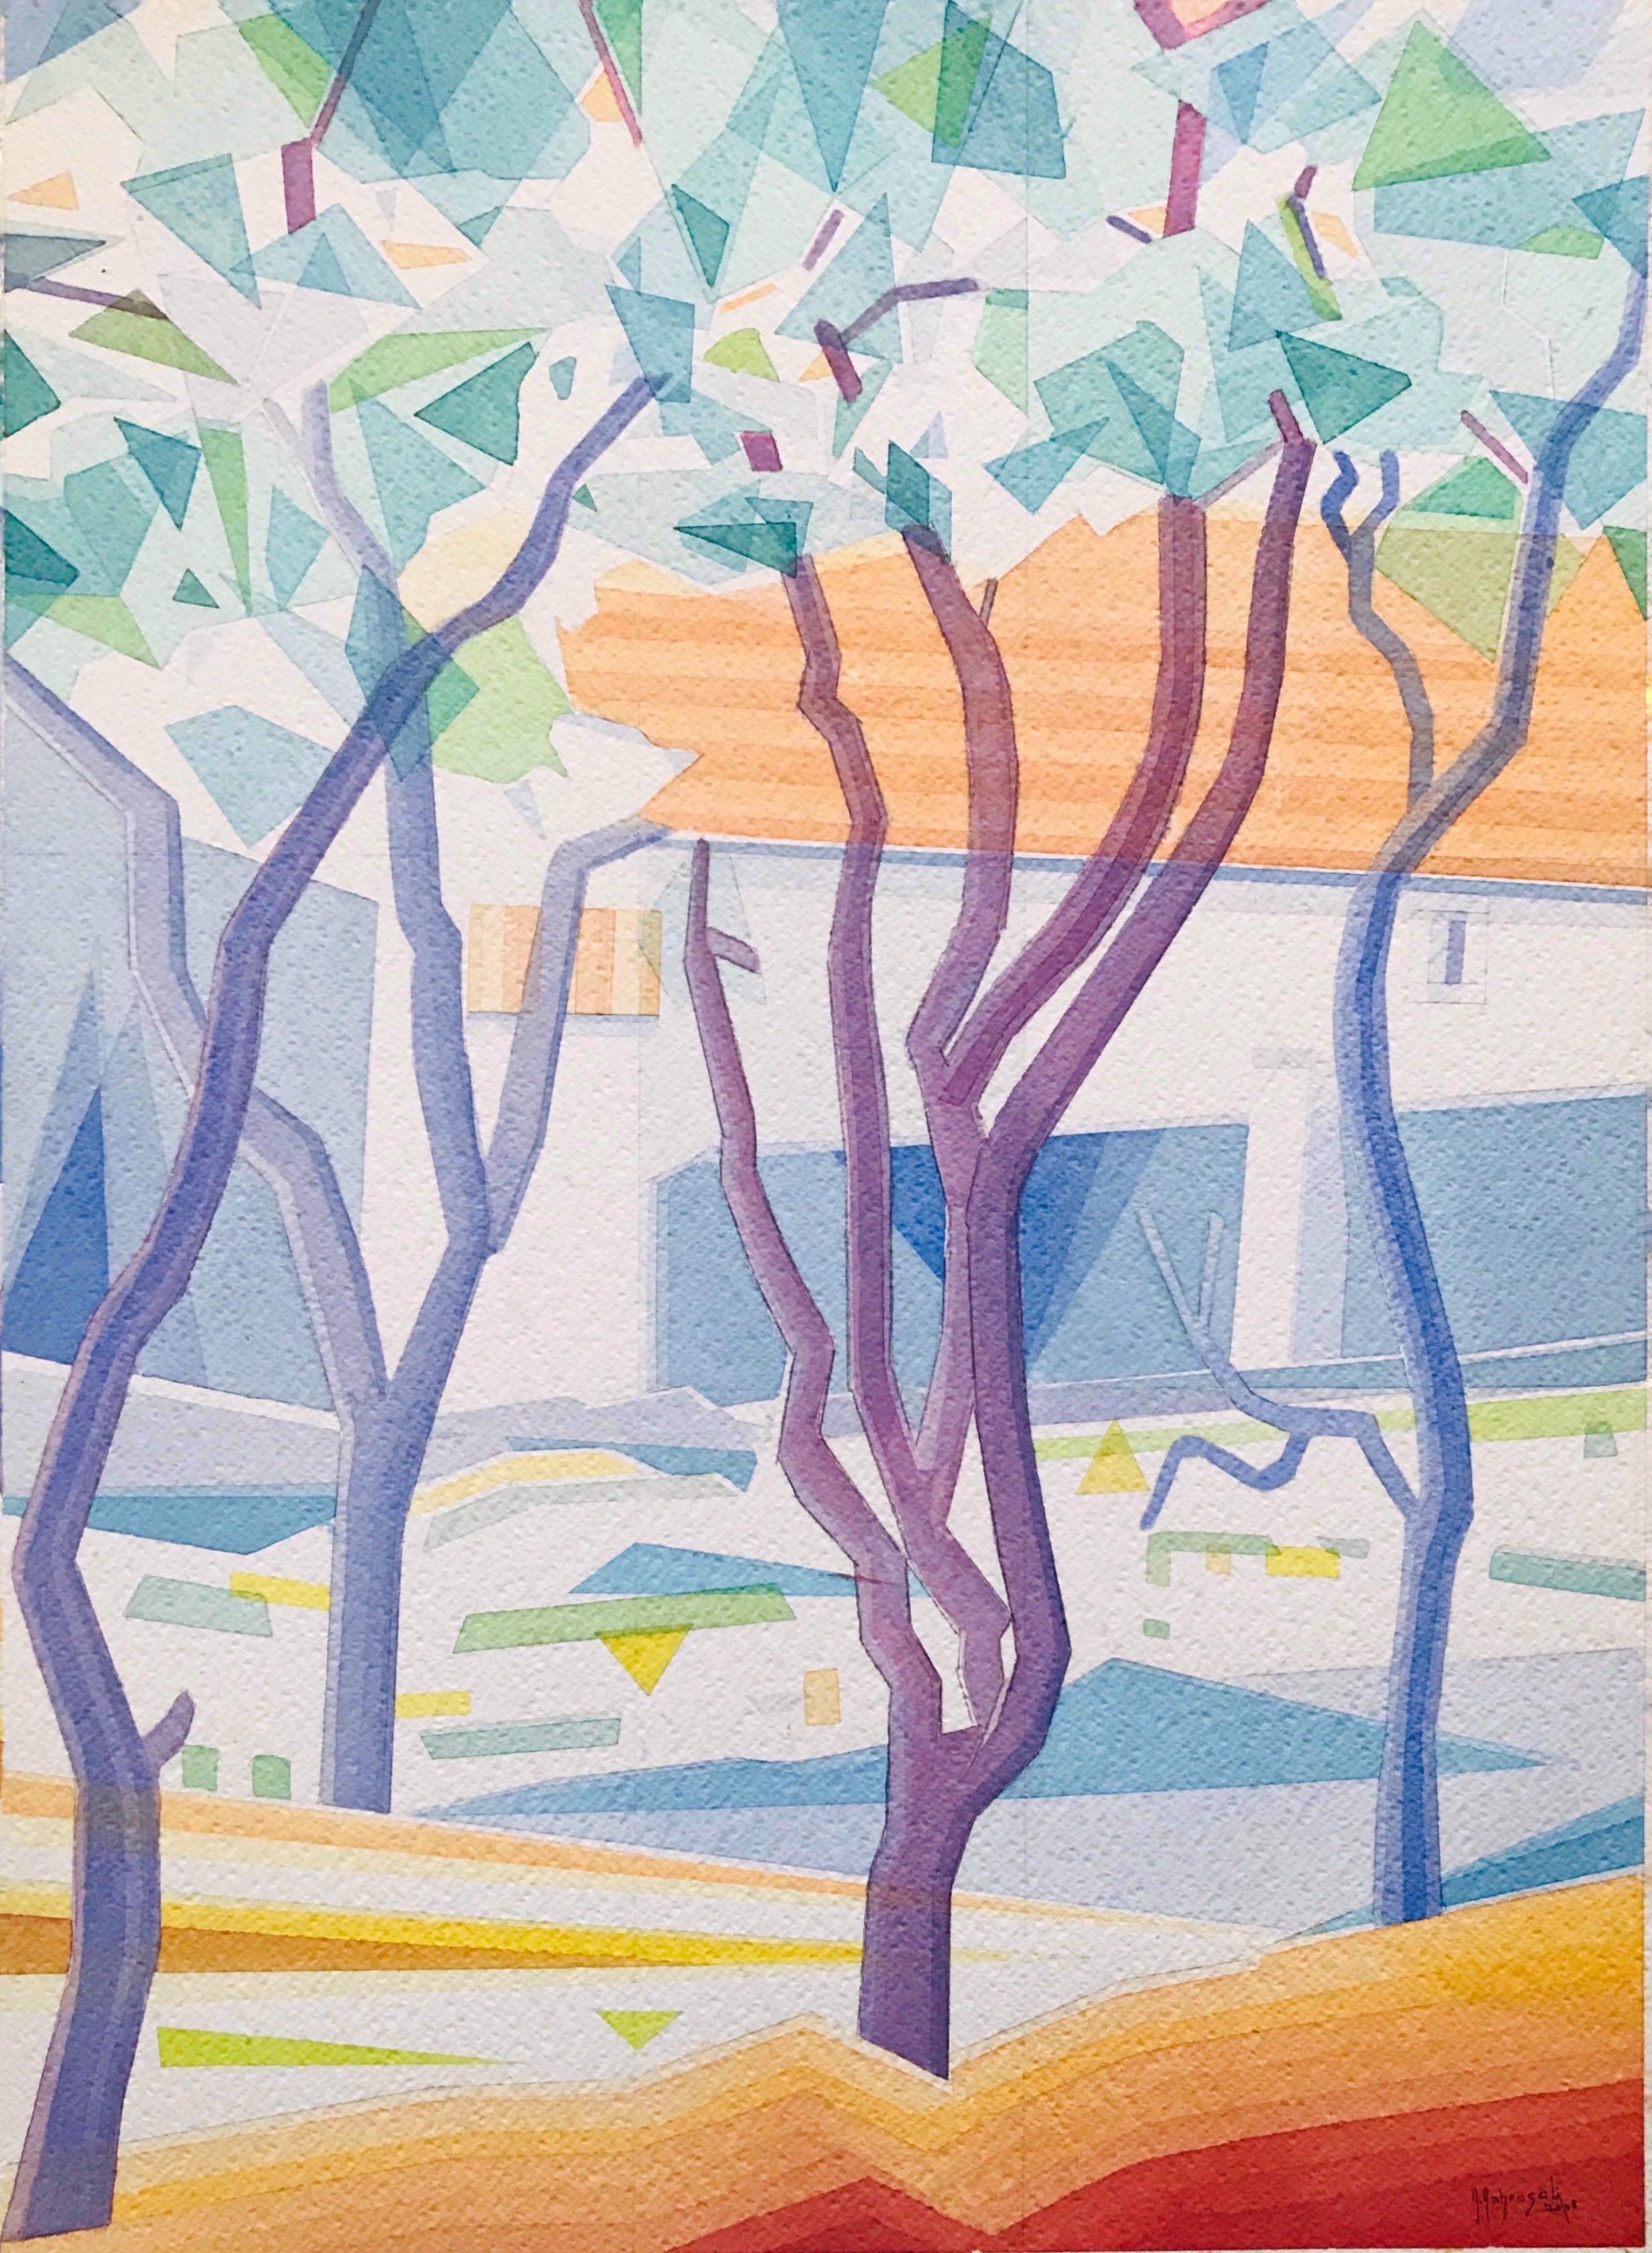 Plum Blossom Trees - Spring by Annemarie Ambrosoli, 58x42cm, abstract geometric